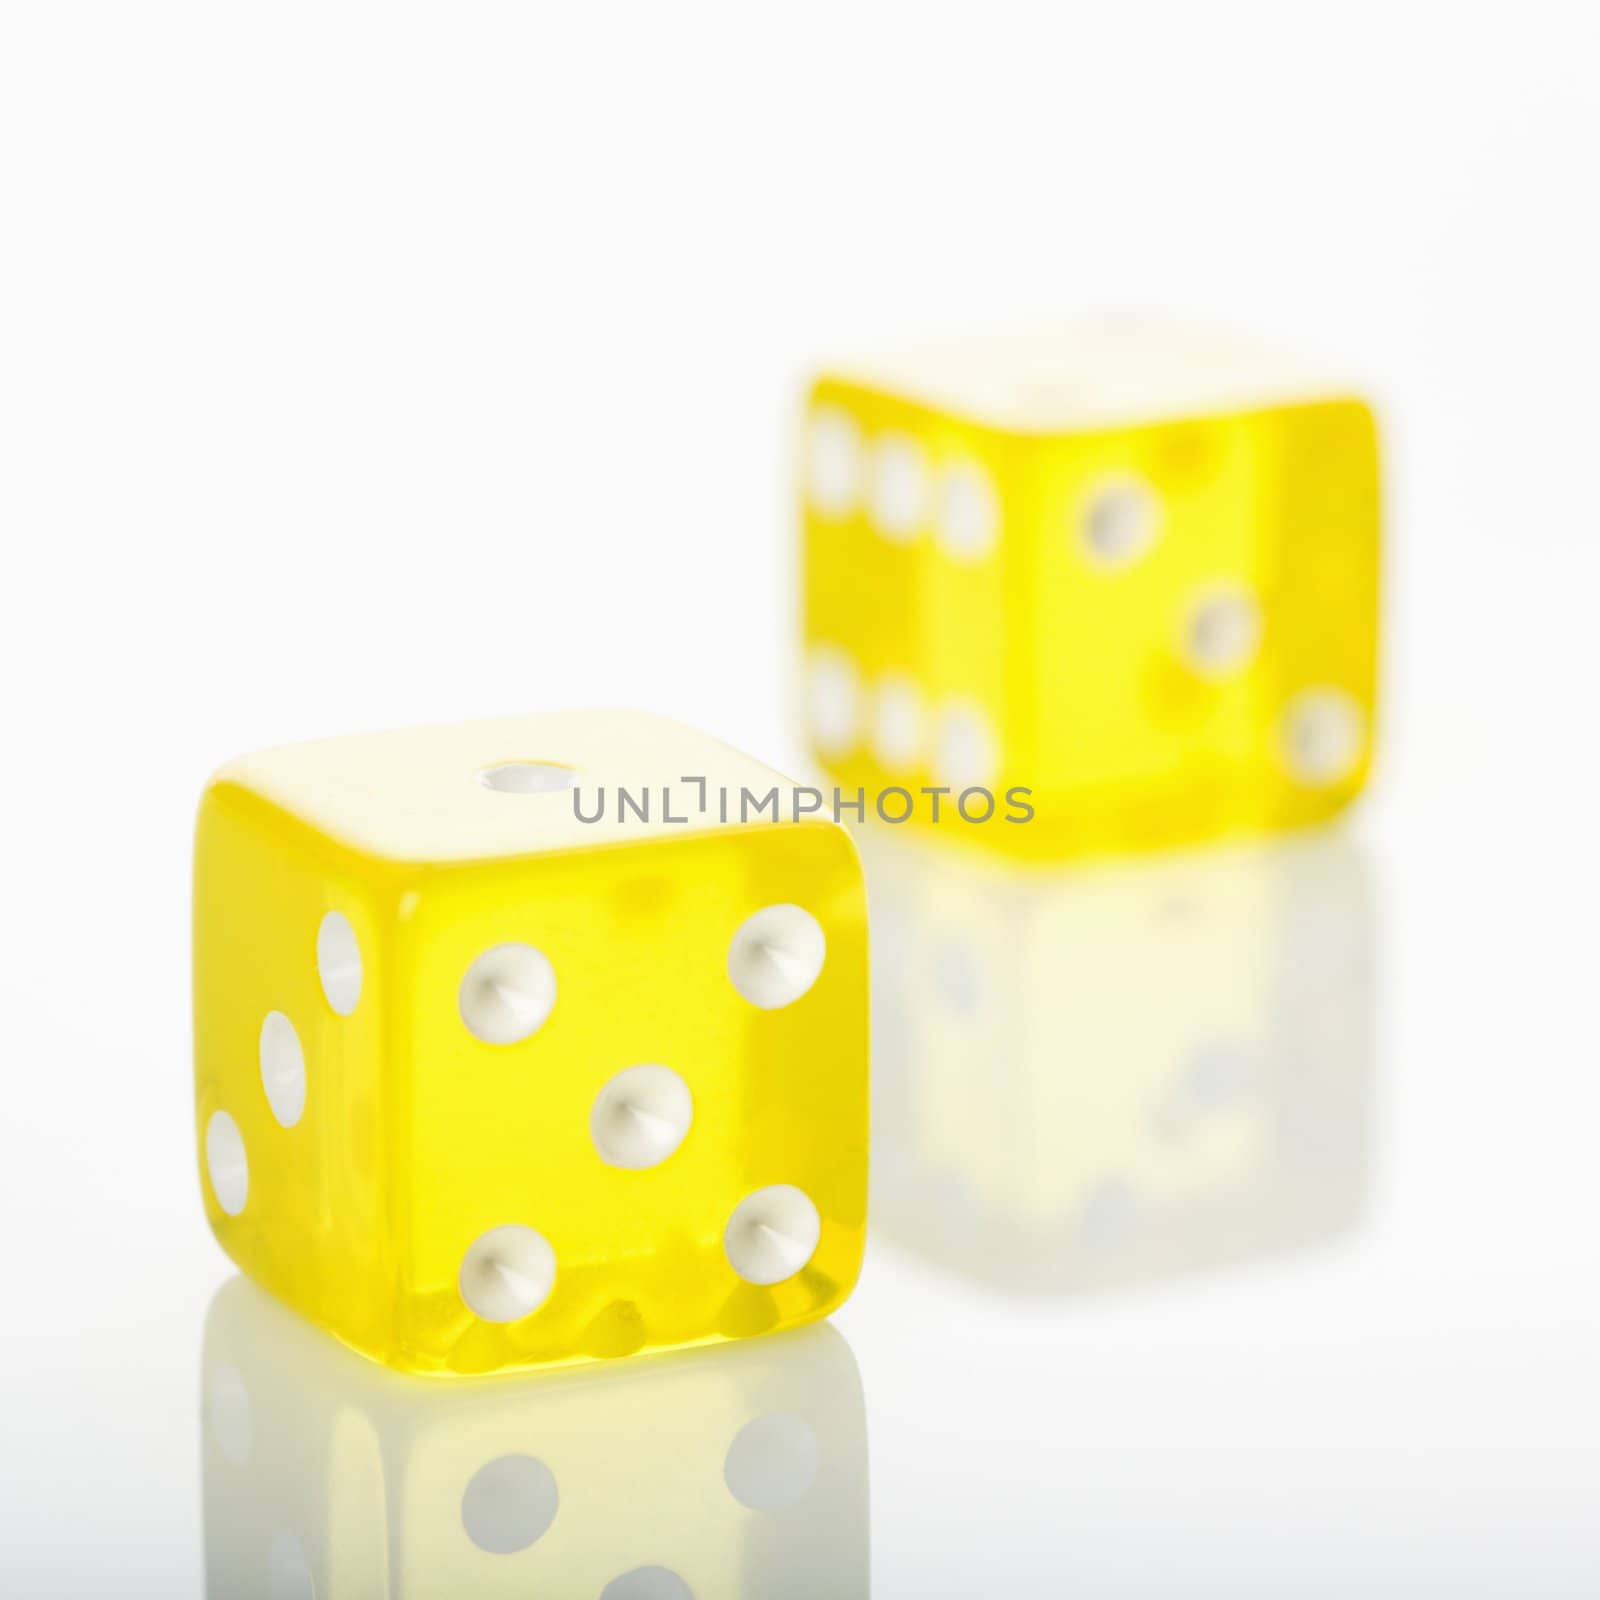 Two yellow dice.